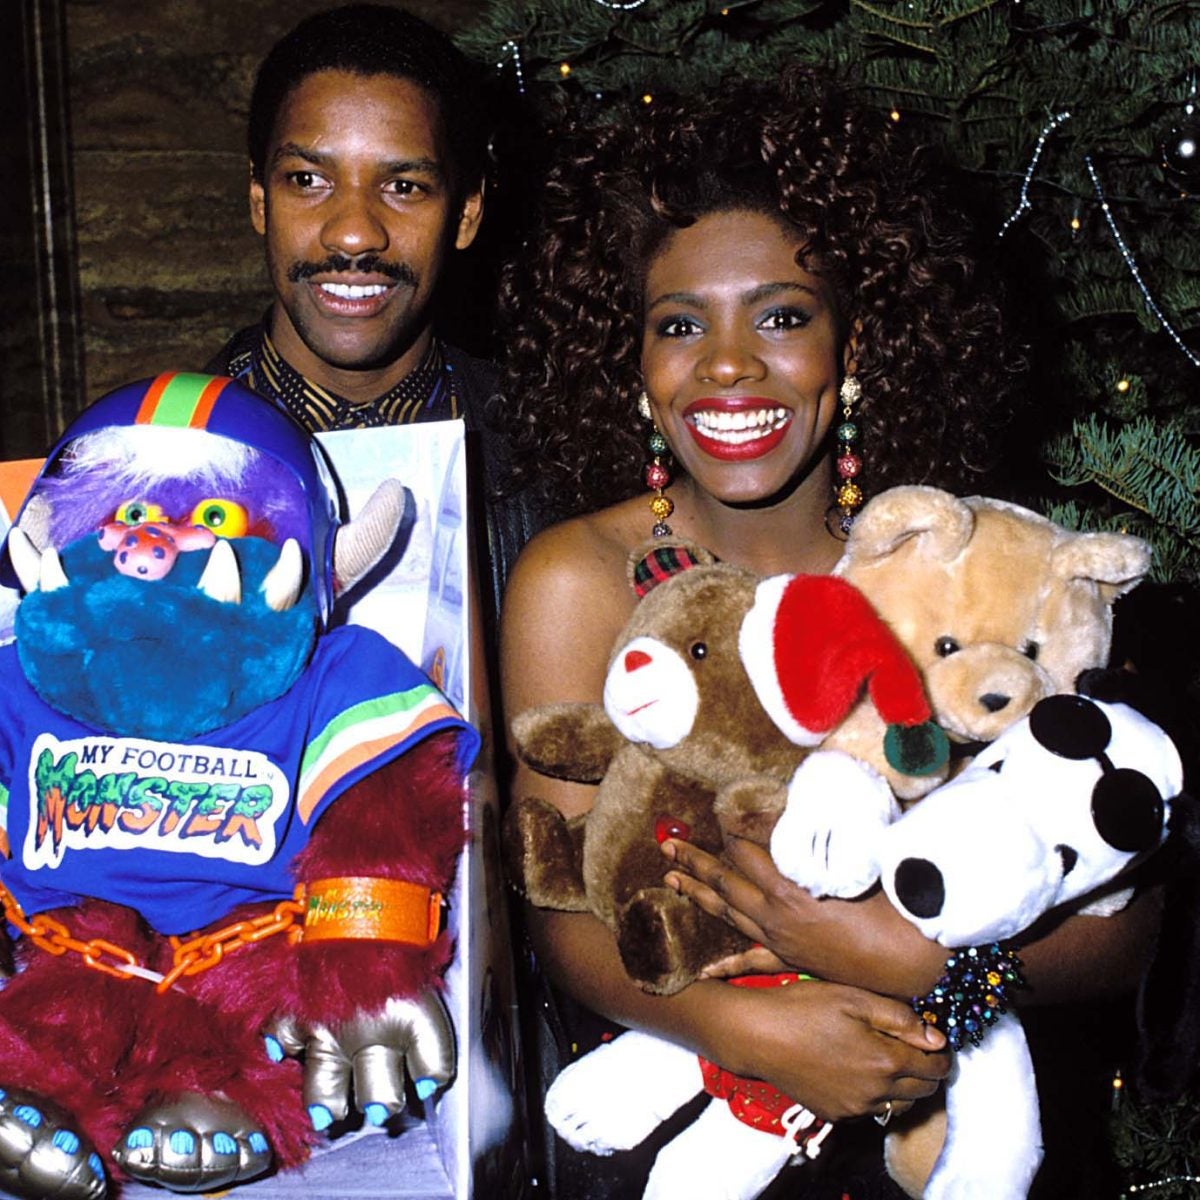 17 Moments Of Vintage Black Joy You Didn't Know You Didn't Know You Needed To See